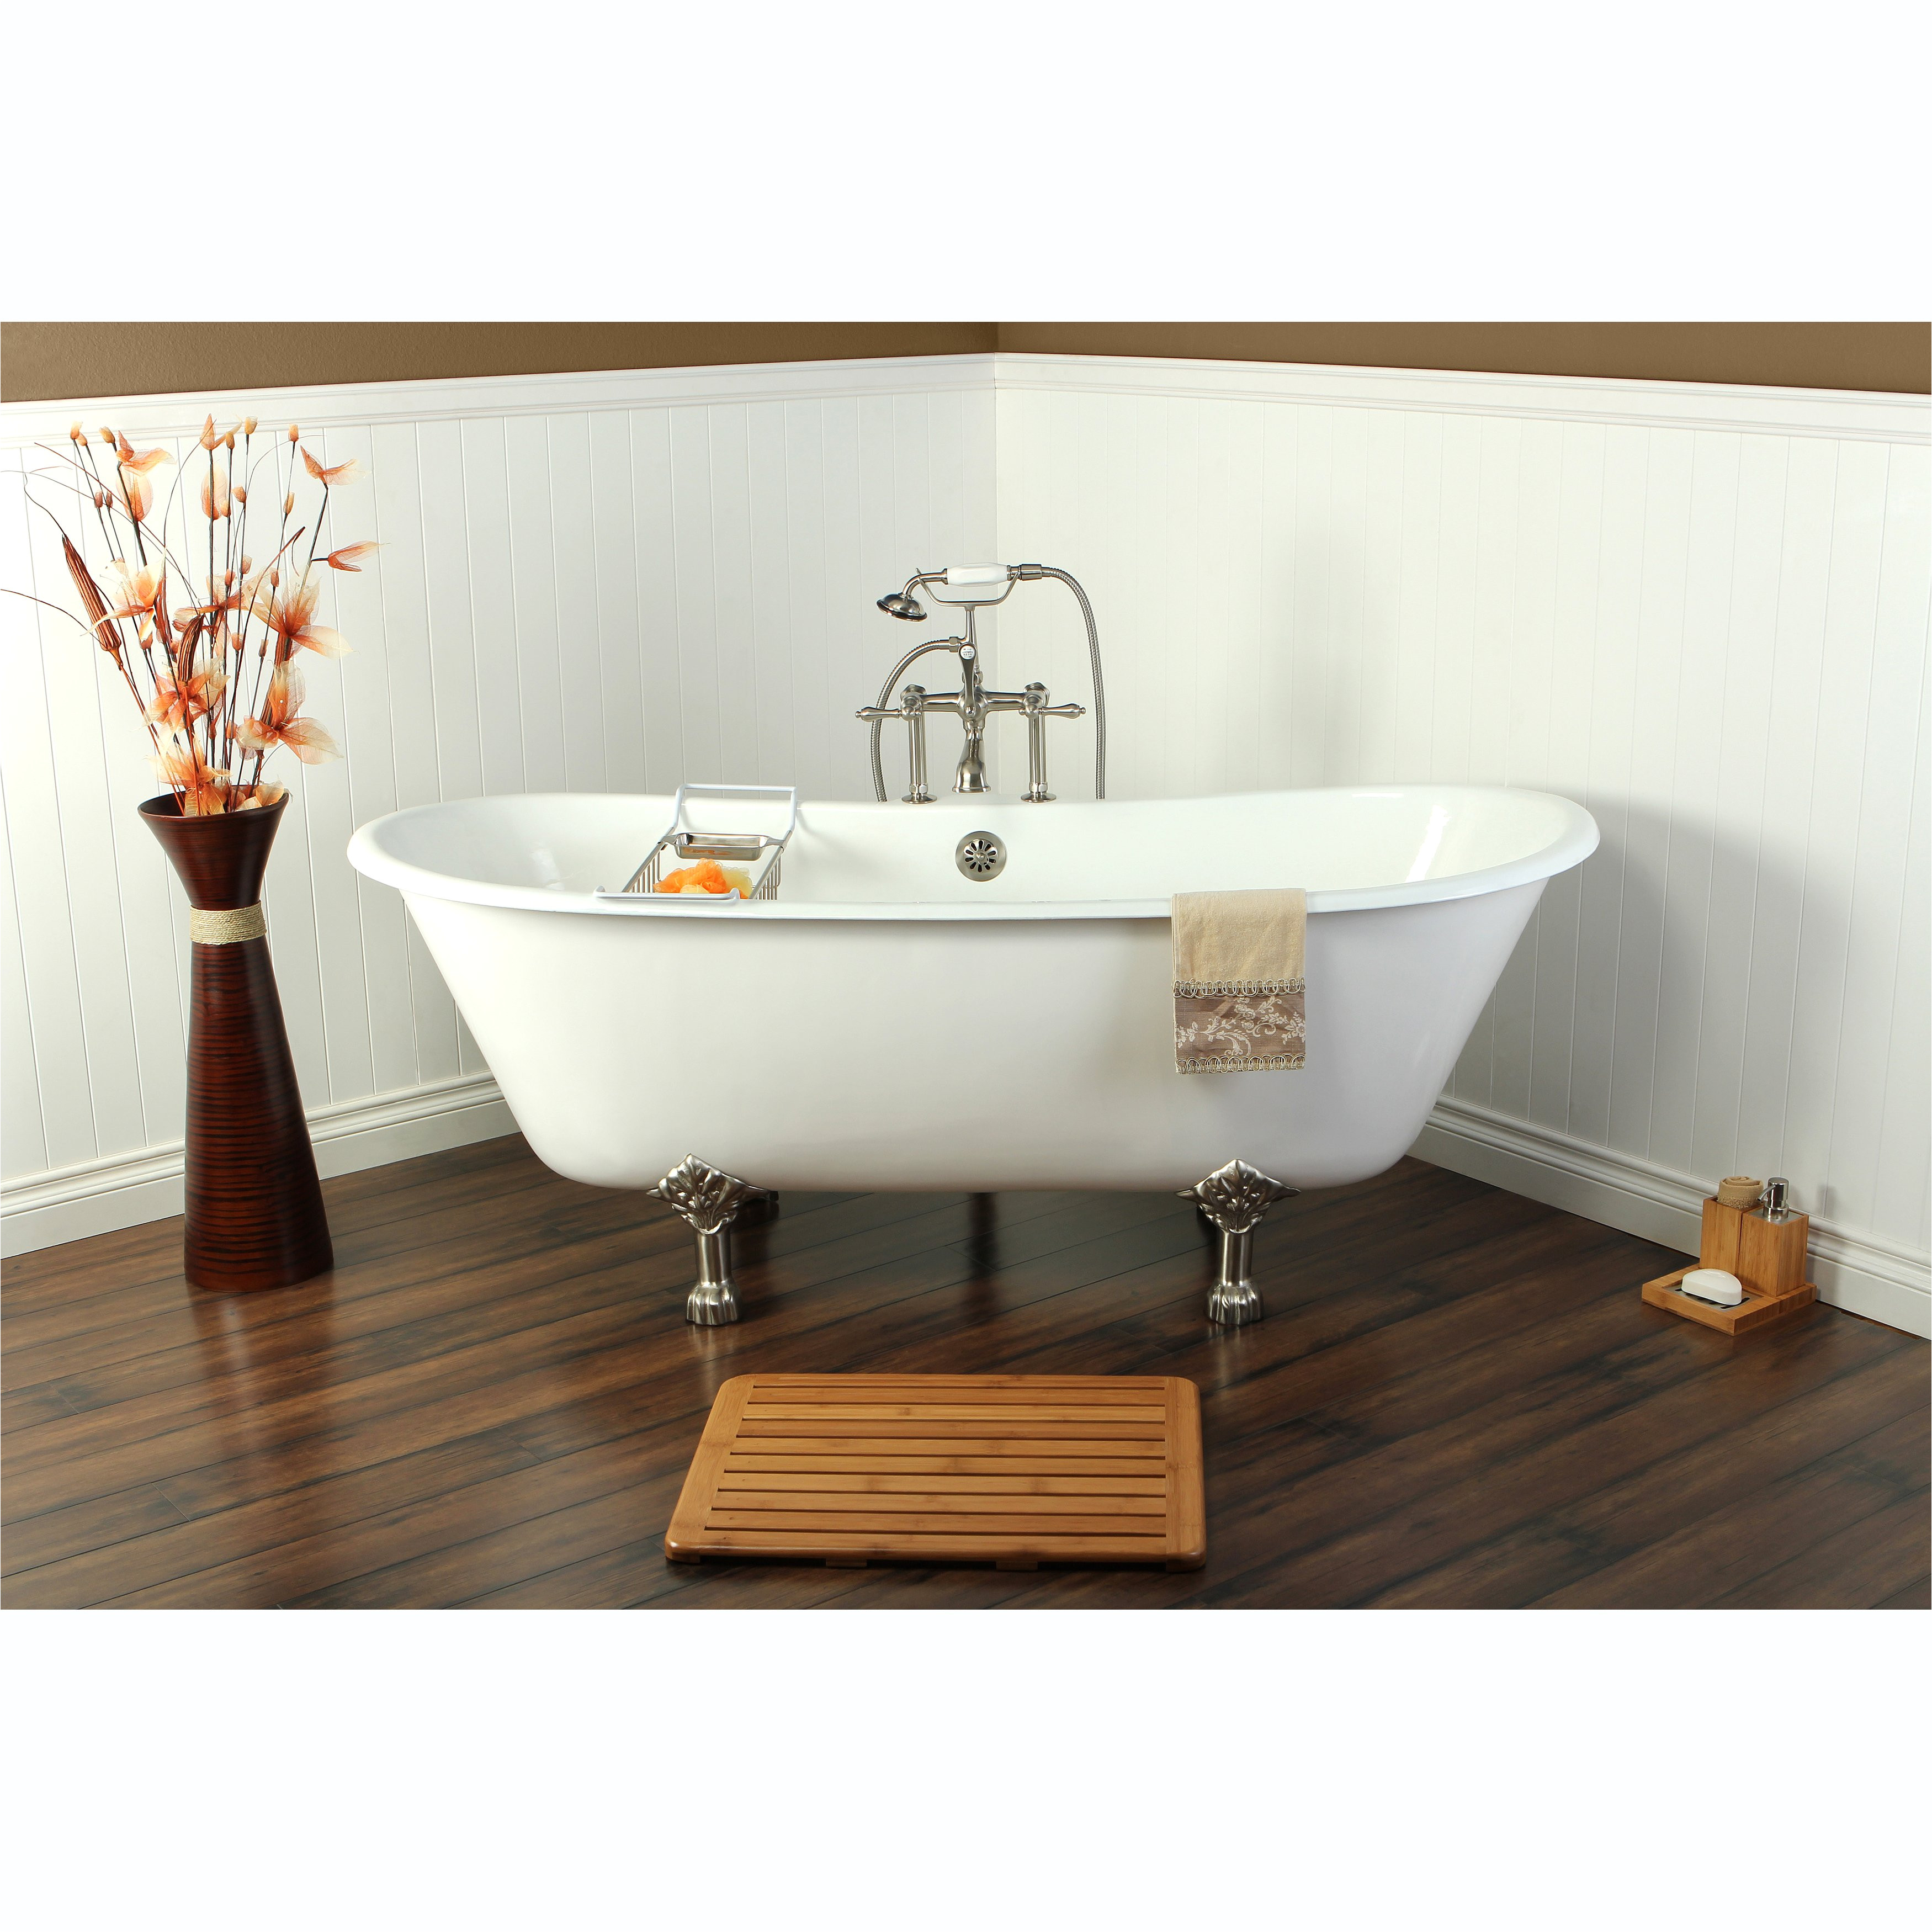 shop 67 inch cast iron double slipper clawfoot bathtub free shipping today overstock com 7729144